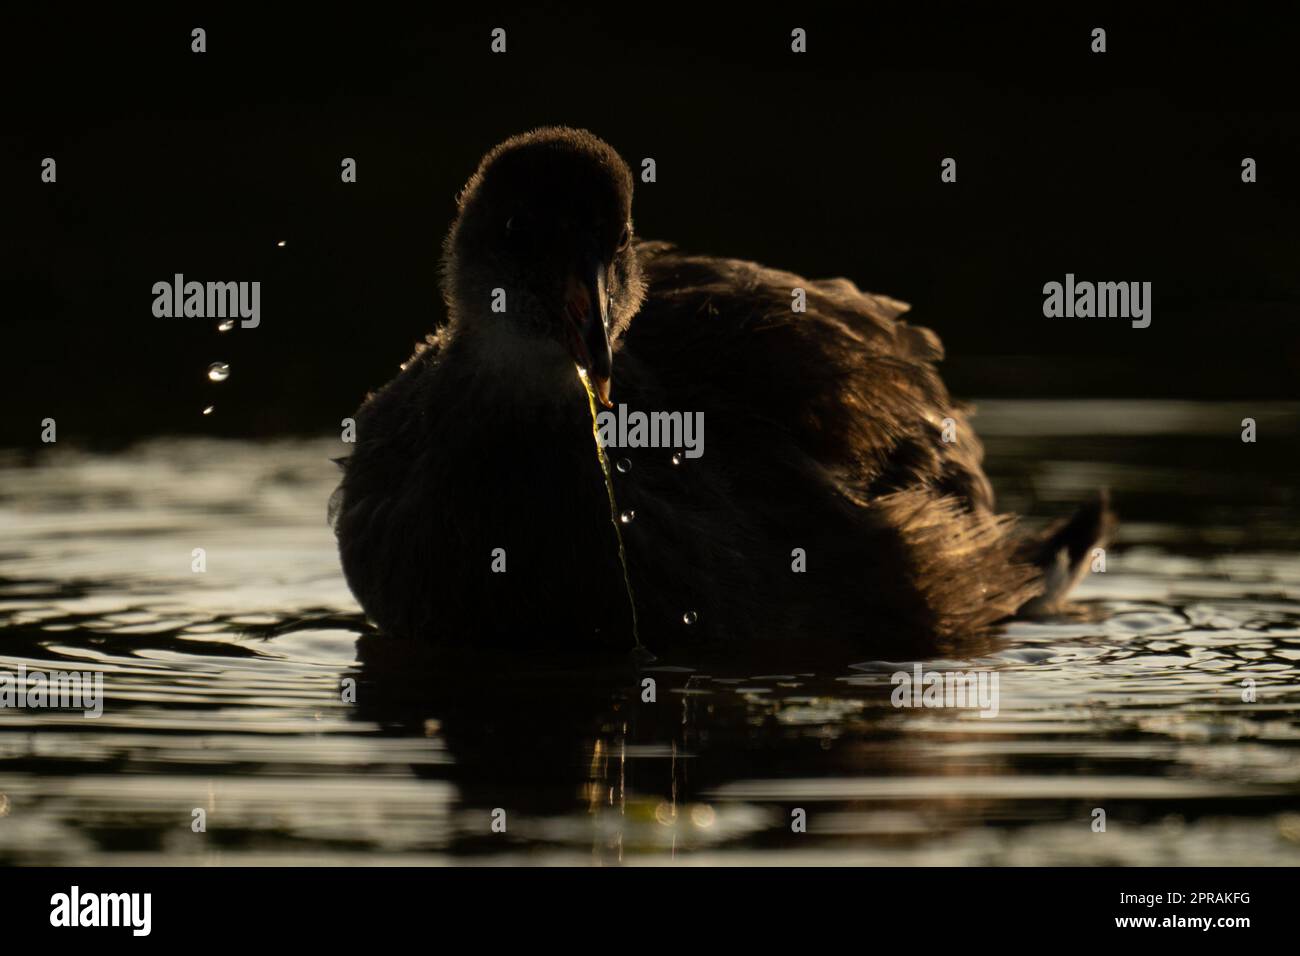 Juvenile moorhen in river with black background Stock Photo